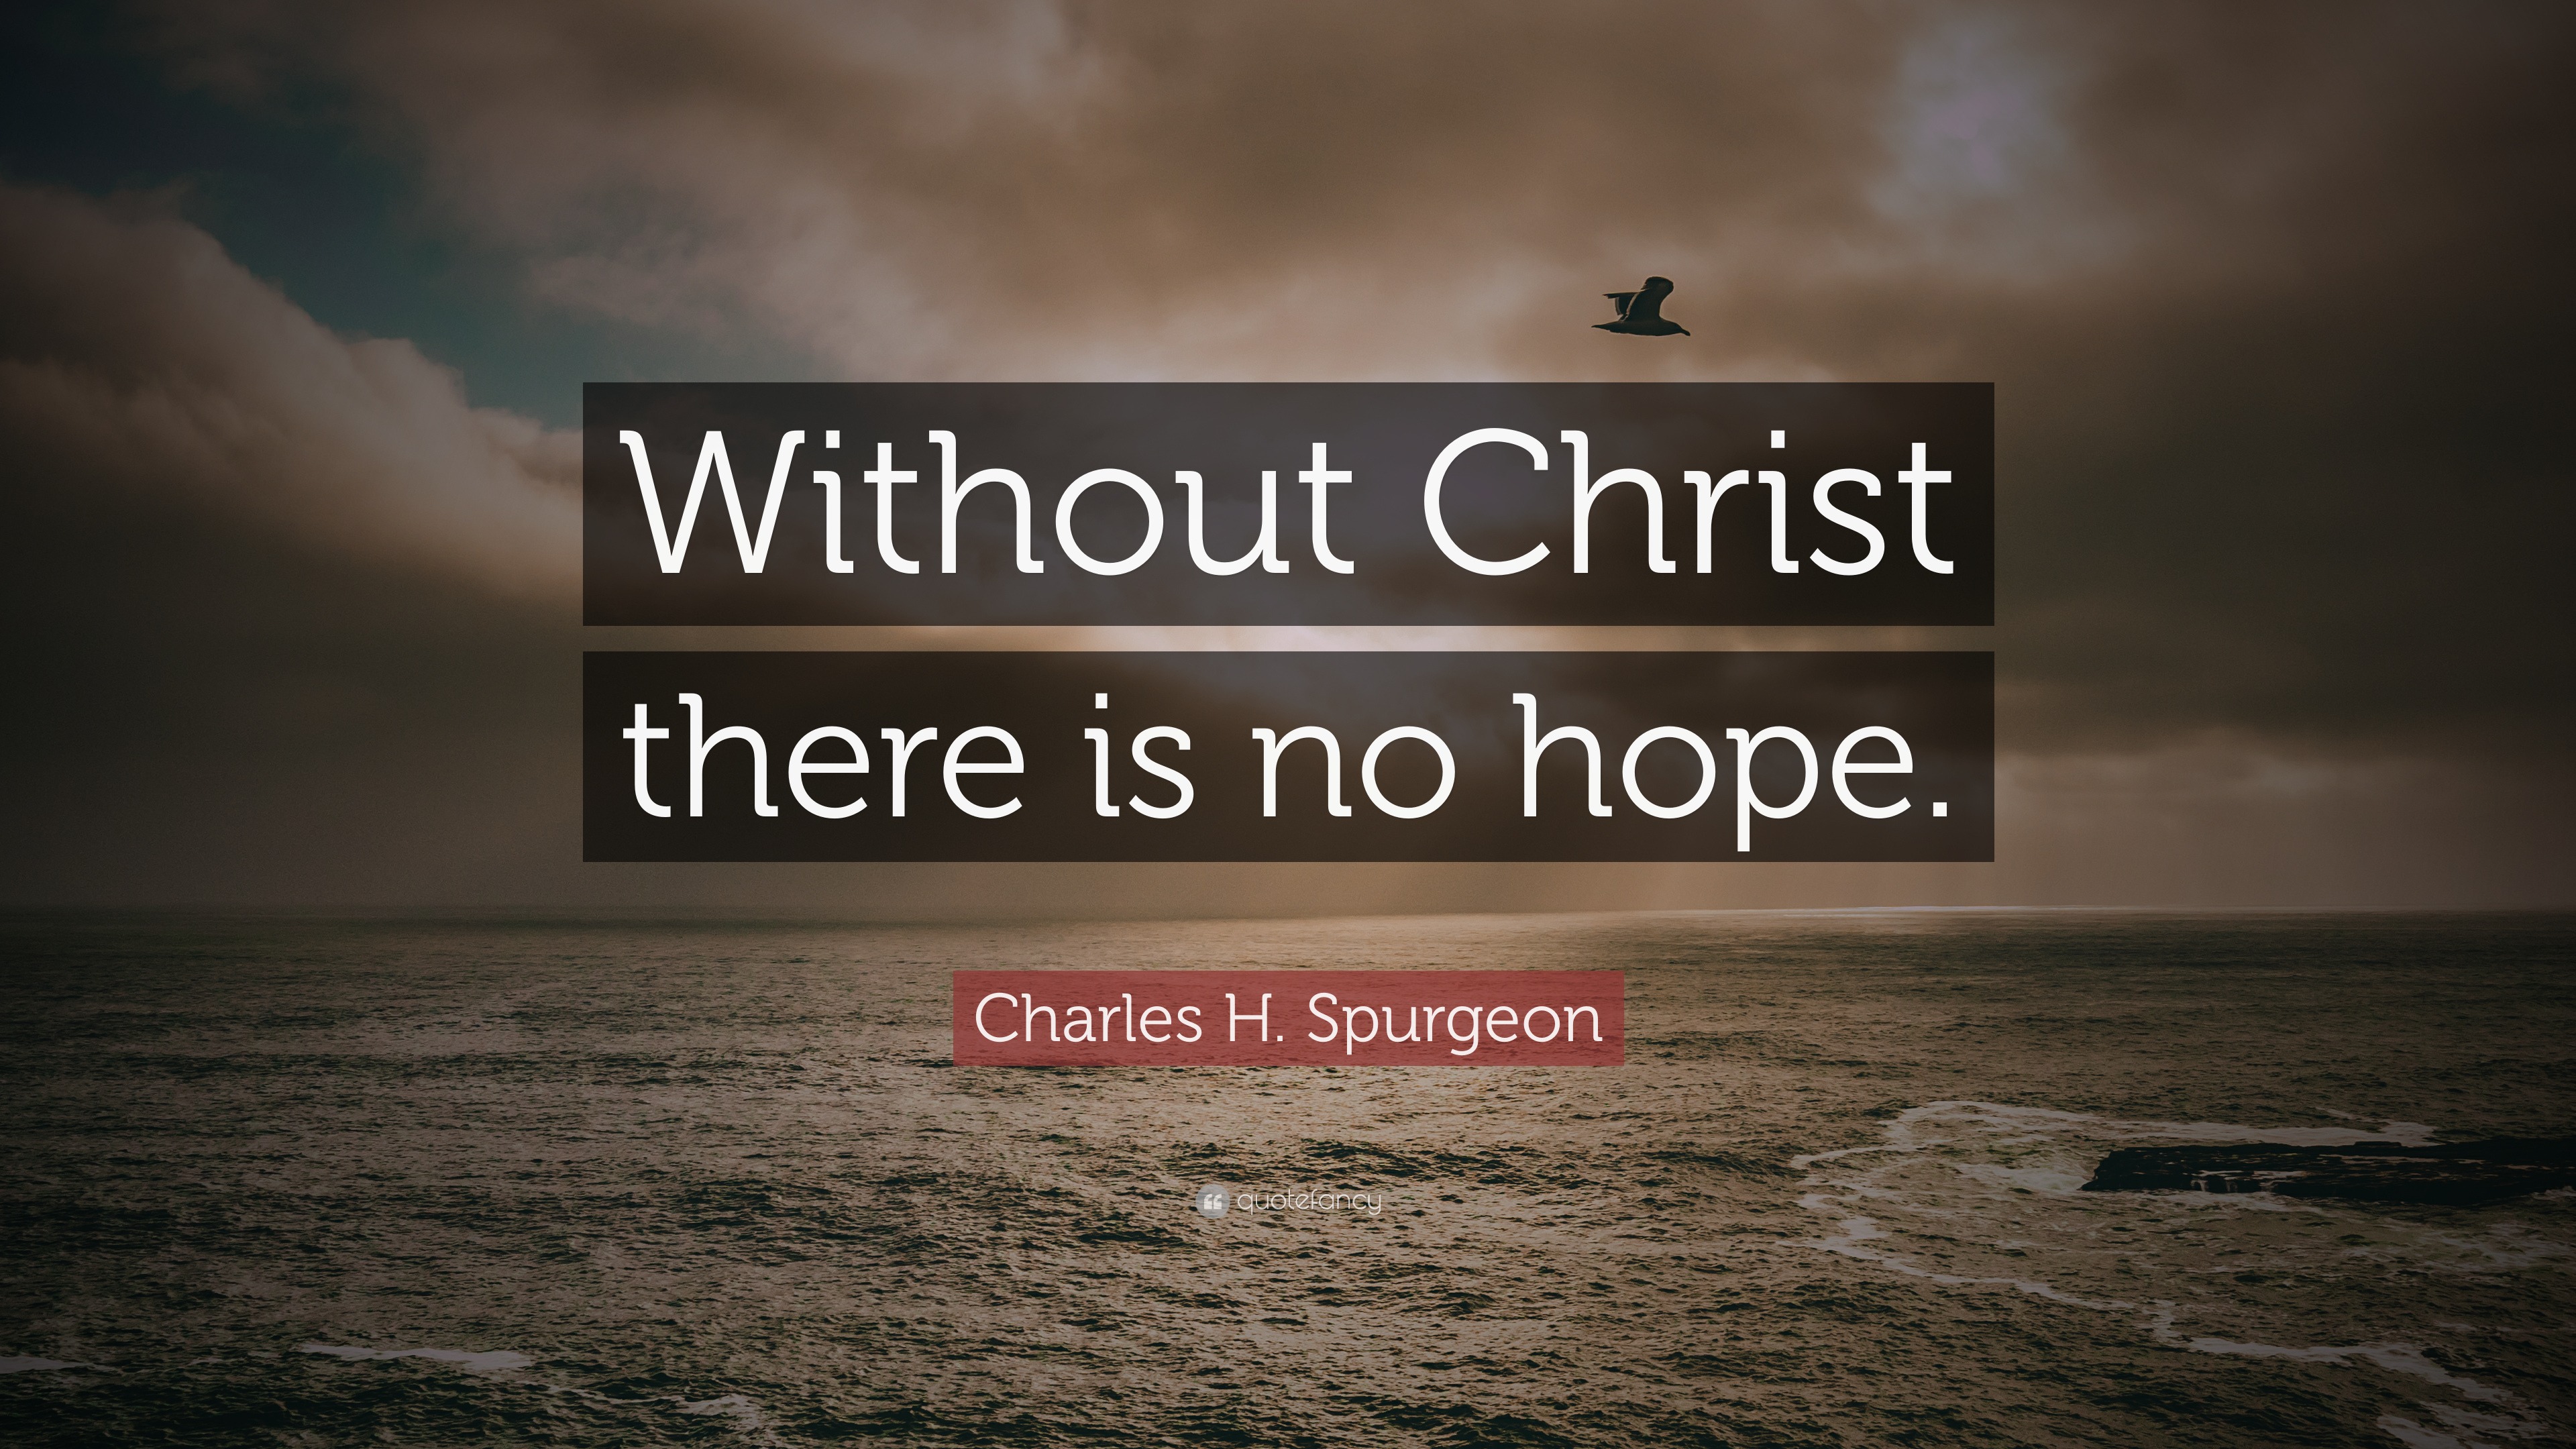 Charles H Spurgeon Quote   Without  Christ there is no hope  